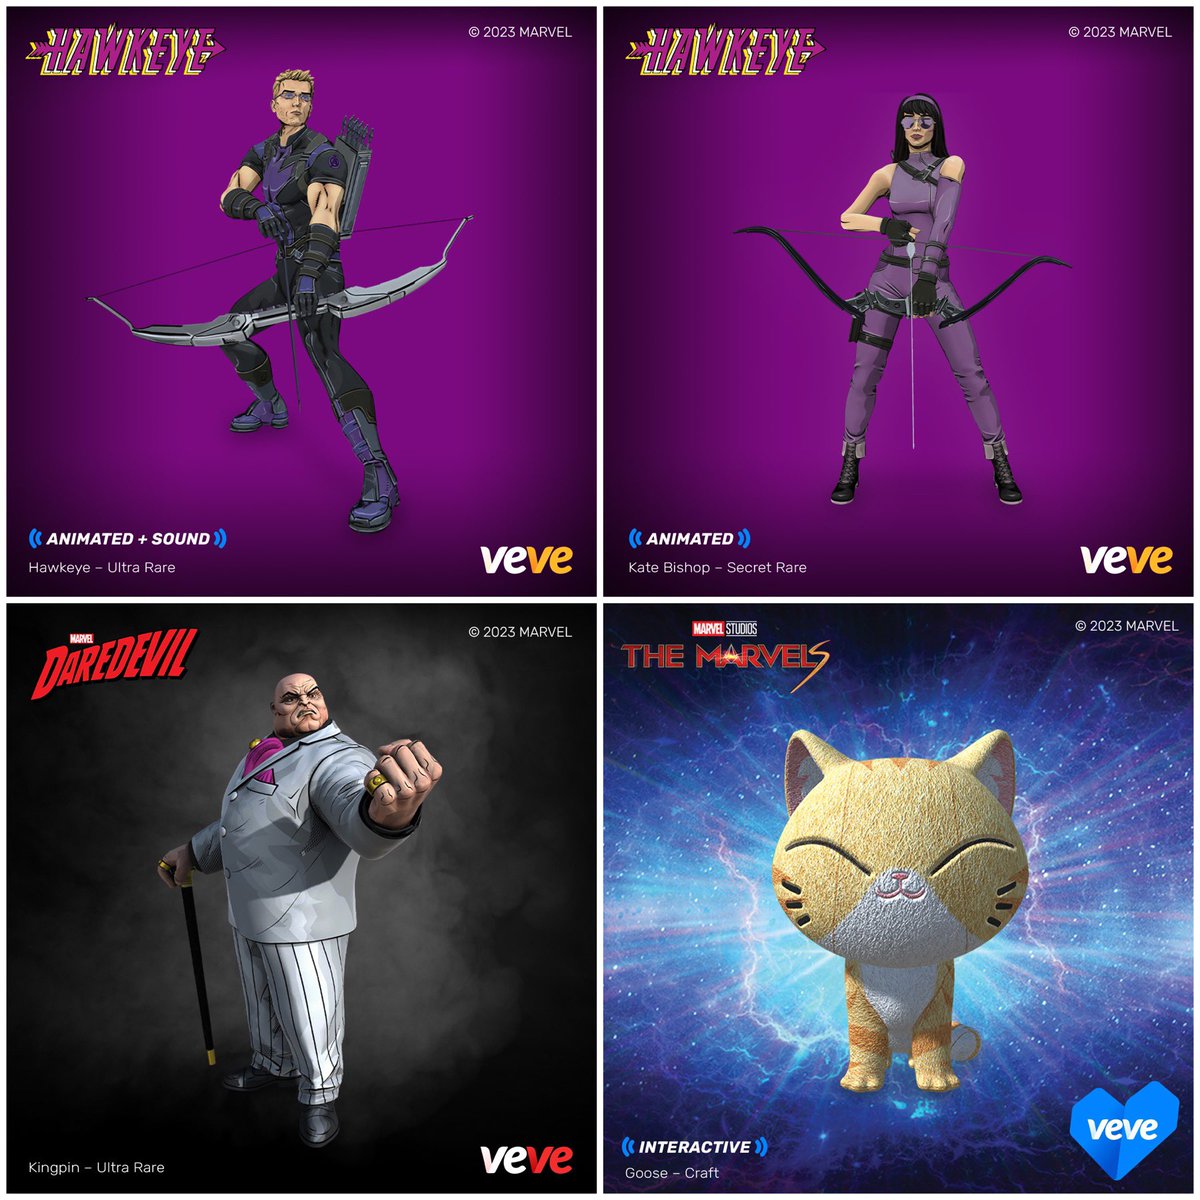 ANNOUNCEMENT: Marvel Burns Incoming 🔥 Remaining Store supply of select digital comics and the following digital collectibles will be burned at ~11:59 PM PT, Sun, 31 March: ➡️ Kingpin ➡️ Flerkittens 1-4 ➡️ Hawkeye ➡️ Kate Bishop